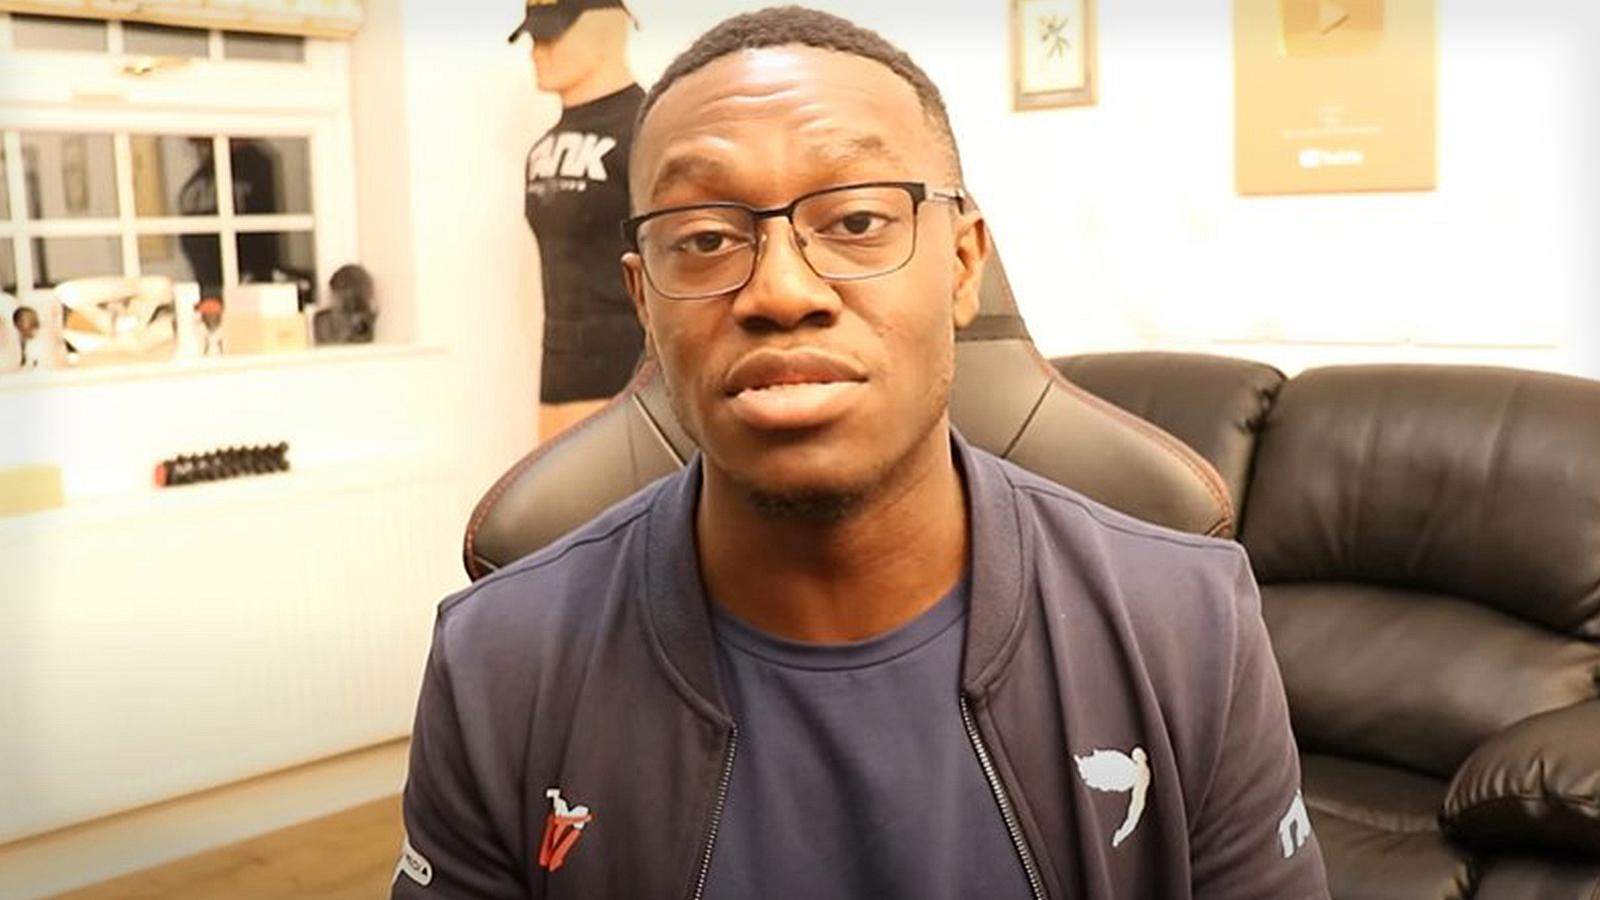 Deji claims Mayweather made drastic change to fight last minute copy 2